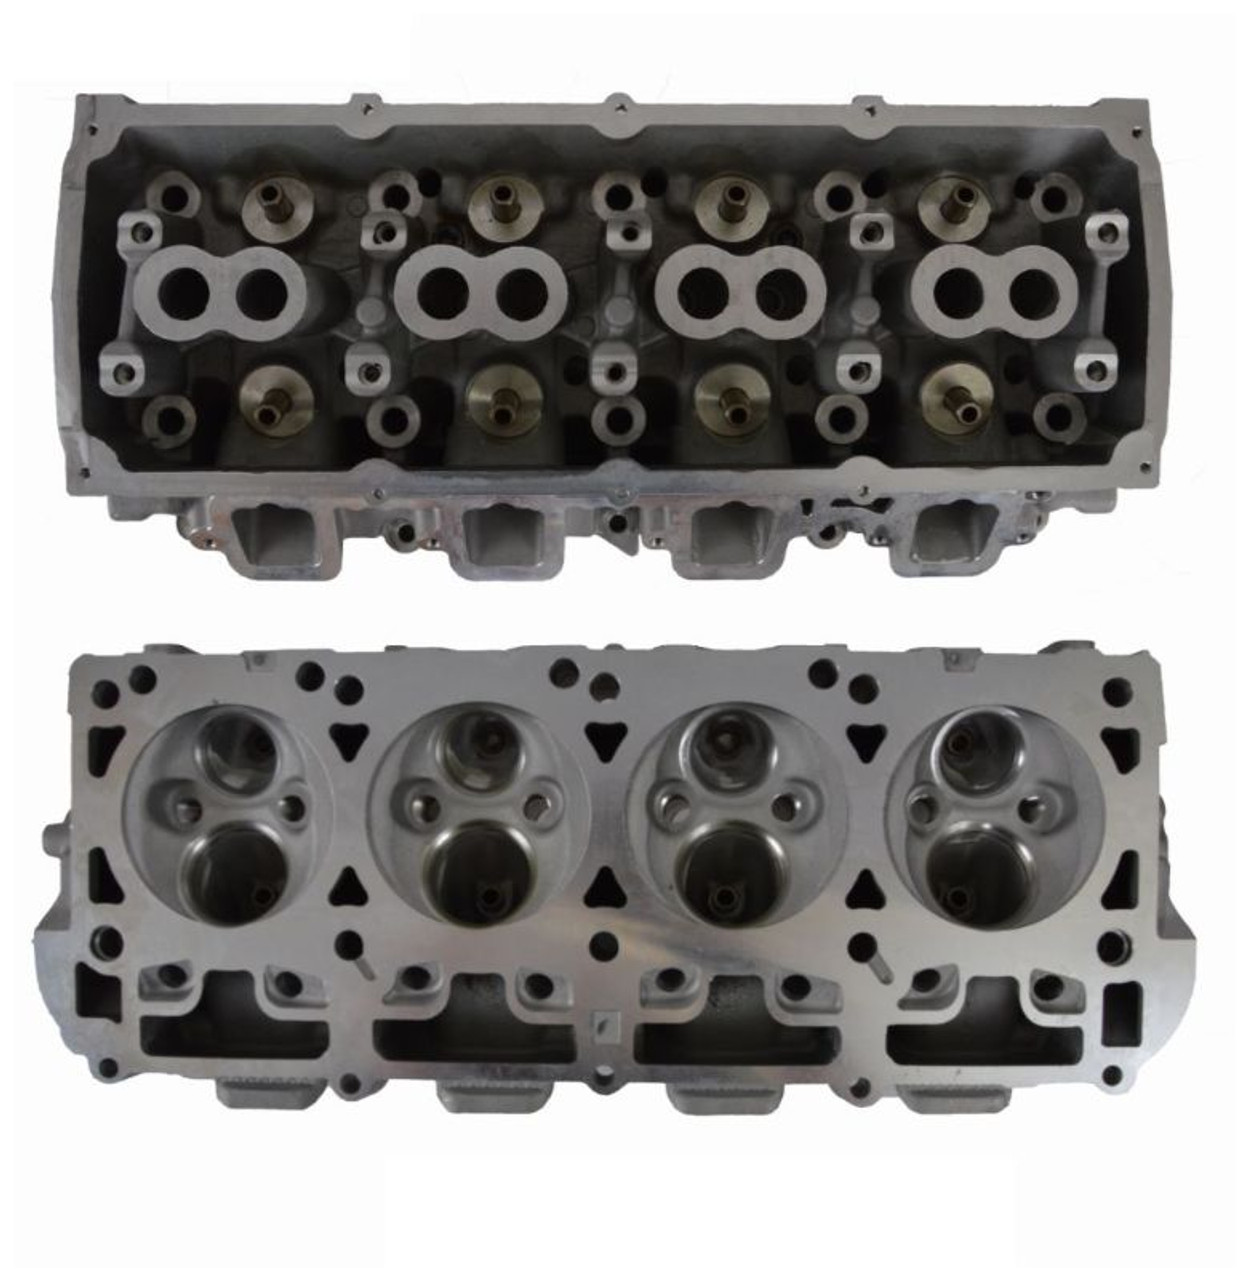 Cylinder Head - 2008 Dodge Charger 5.7L (EHCR345R-1.D40)